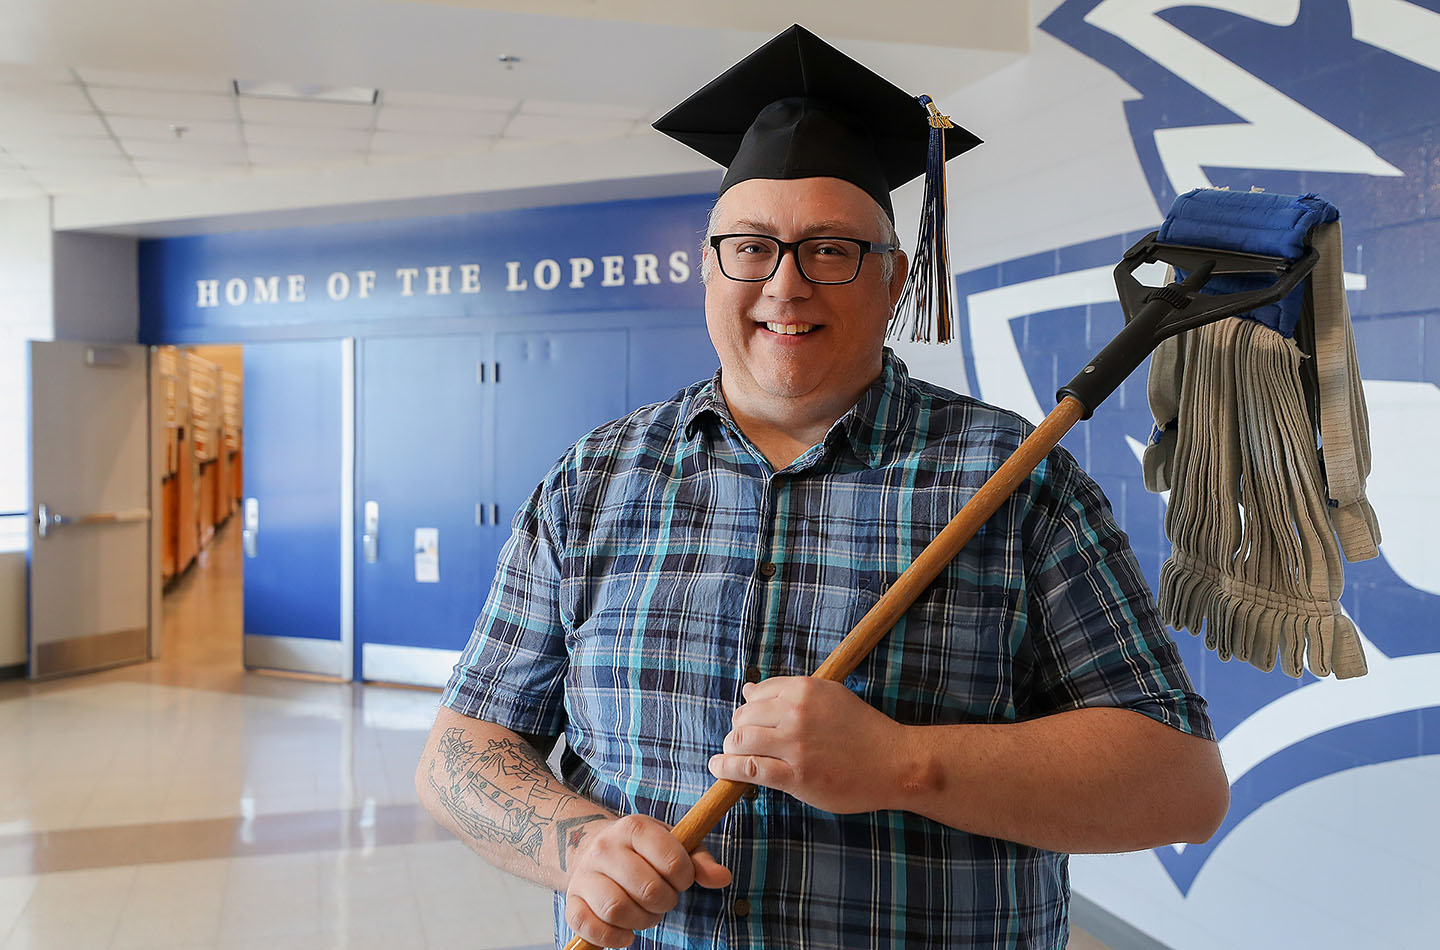 Sonny O’Connor worked as a custodian while attending UNK and used the university’s employee scholarship program to cover tuition costs. He’ll graduate Friday with a bachelor’s degree in general studies. (Photo by Erika Pritchard, UNK Communications)